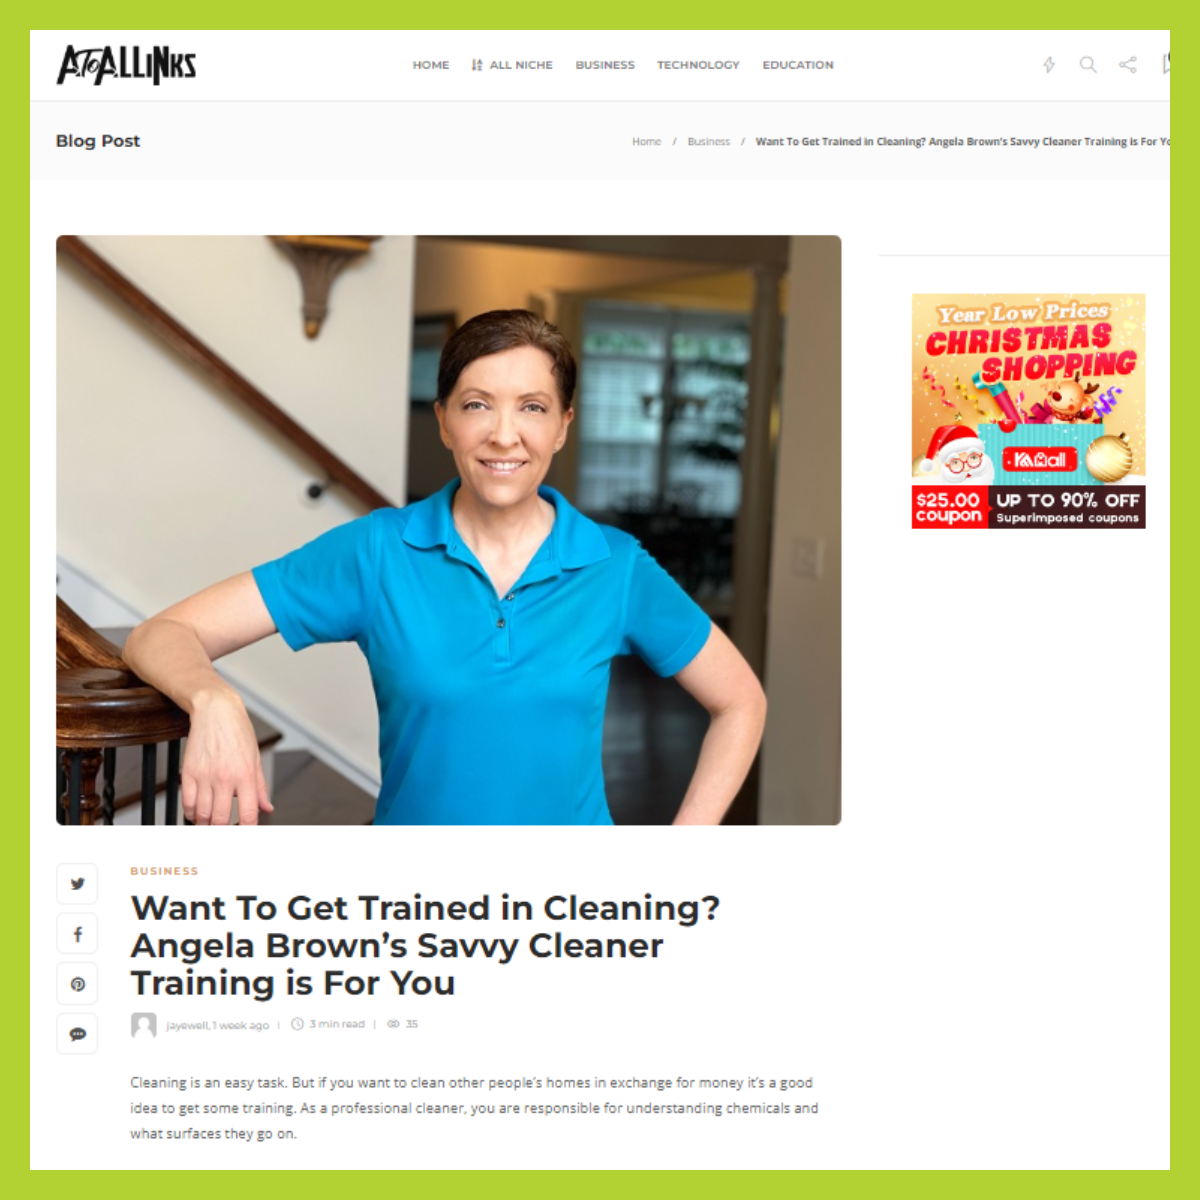 A to All Links features Angela Brown's Savvy Cleaner for Cleaning Training